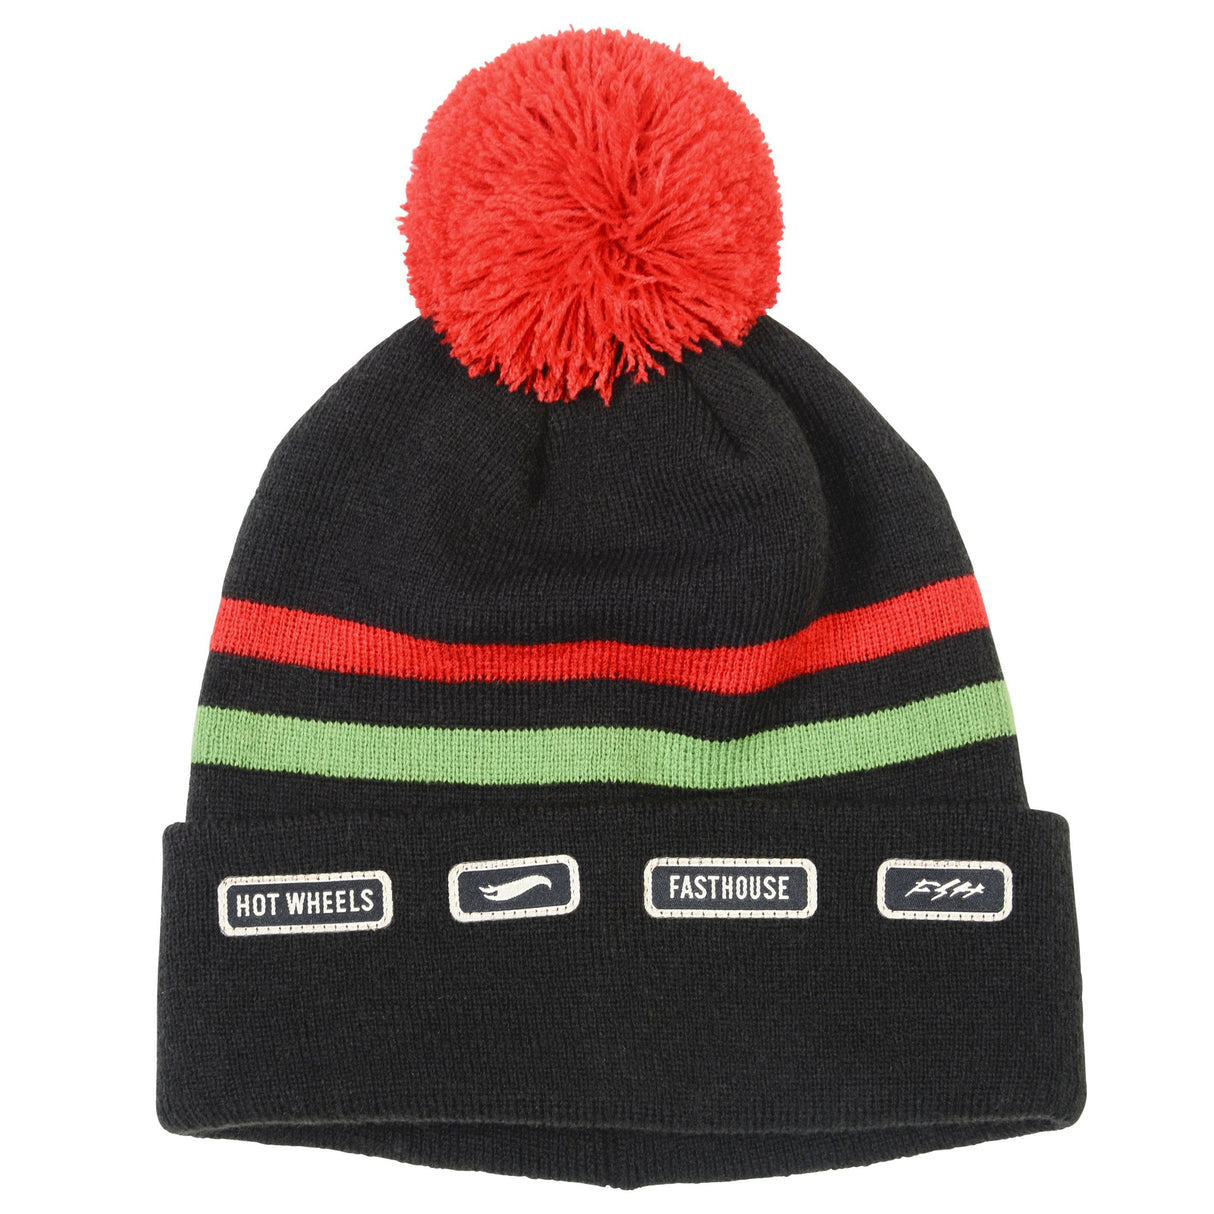 Fasthouse Express Hot Wheels Pom Beanie 2022: Black/Red One Size